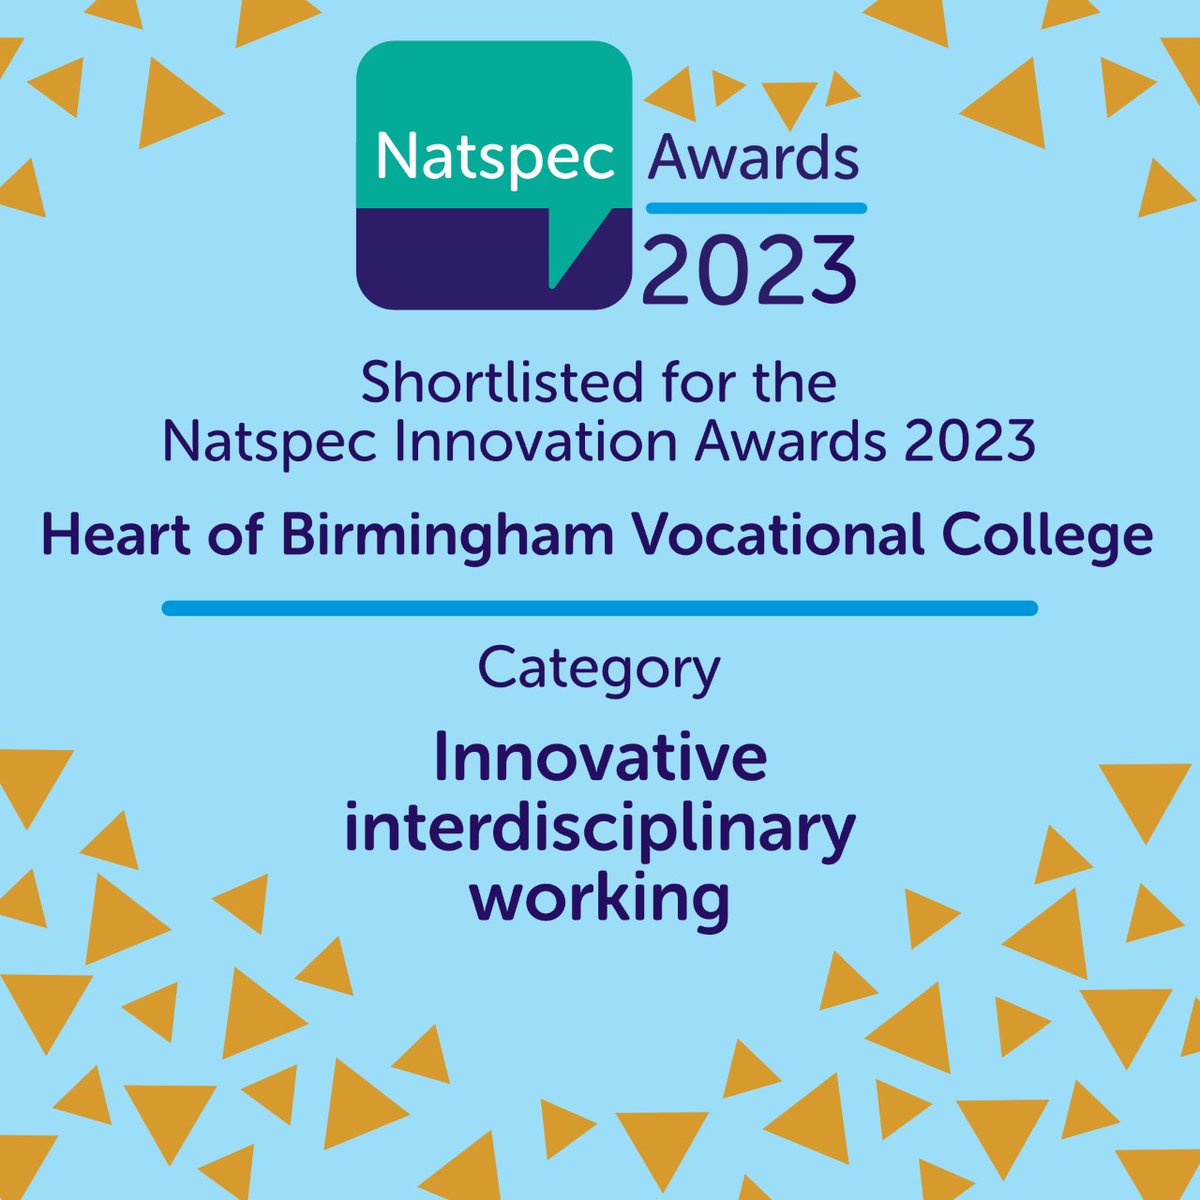 We’ve been shortlisted for the #Natspec Award for Innovative Interdisciplinary Working, for our staff skills share CPD programme! Look out for the winners announcement by Natspec on 25th May. #InnovativeWorking #hbvctheplacetobe